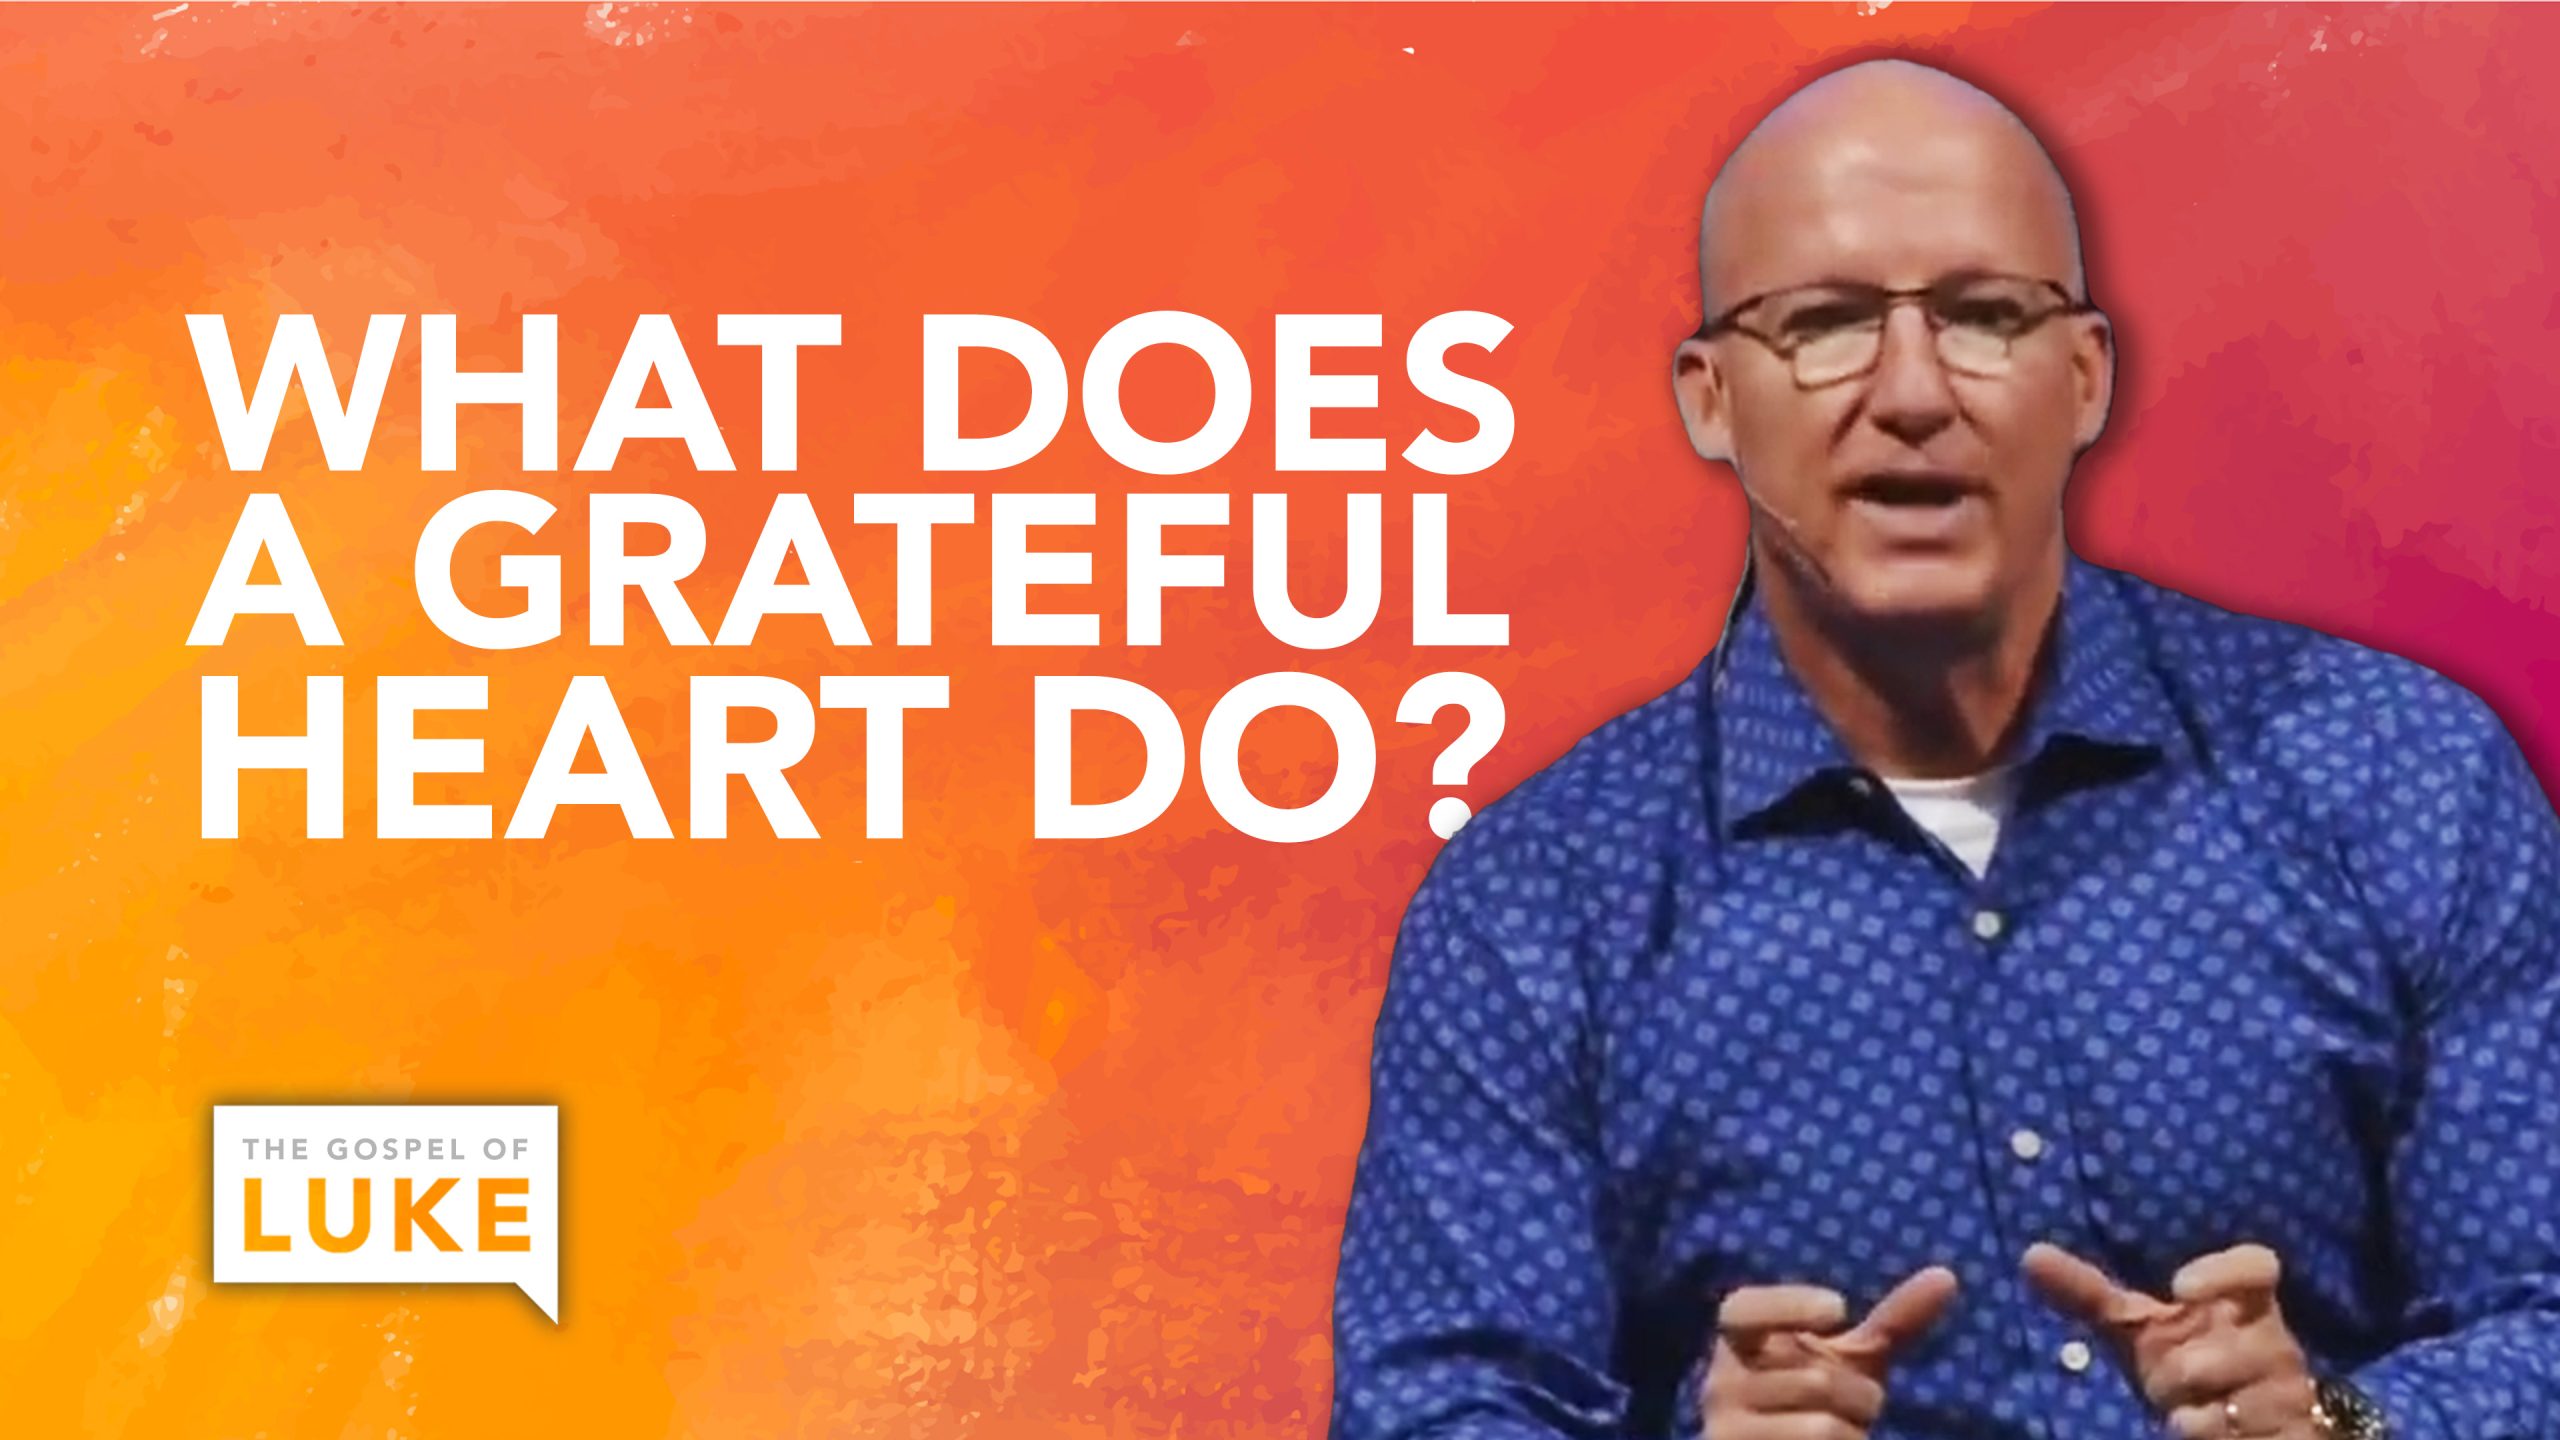 63 – So, What Does a Grateful Heart Do?